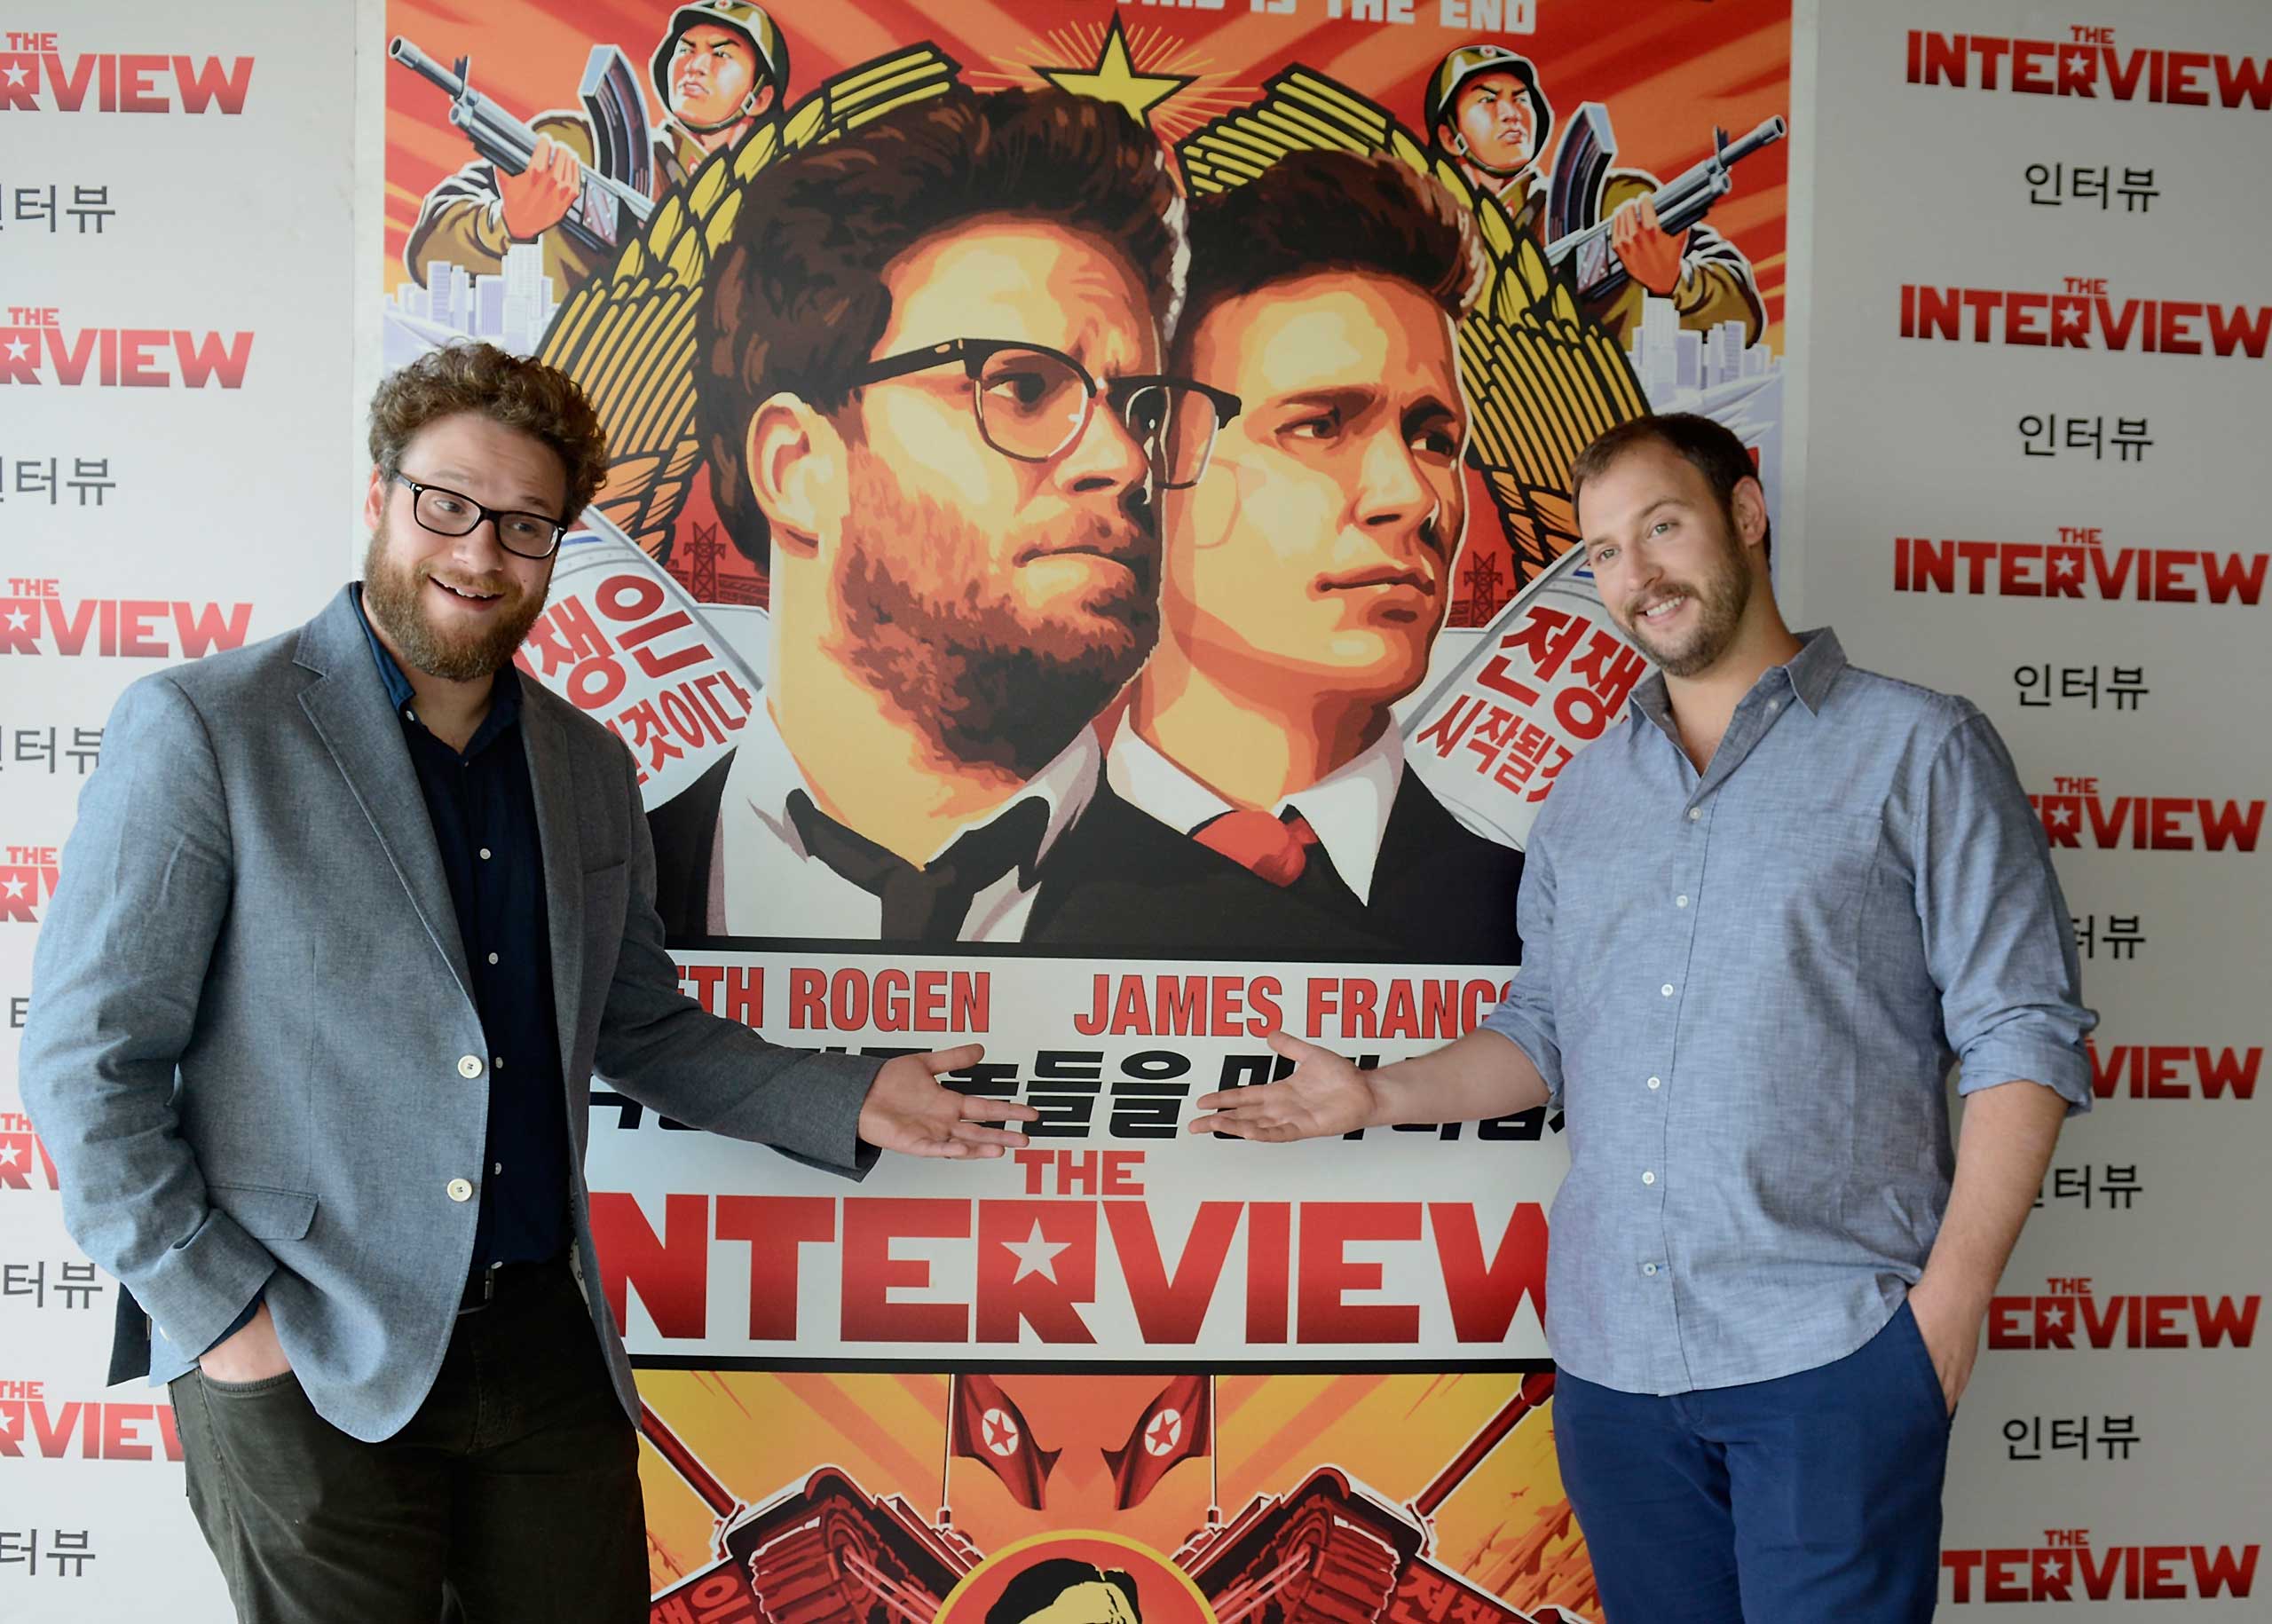 Seth Rogen (L) and Evan Goldberg pose during a photocall for their latest film 'The Interview' at the Hotel Mandarin on June 18, 2014 (Robert Marquardt—Getty Images)